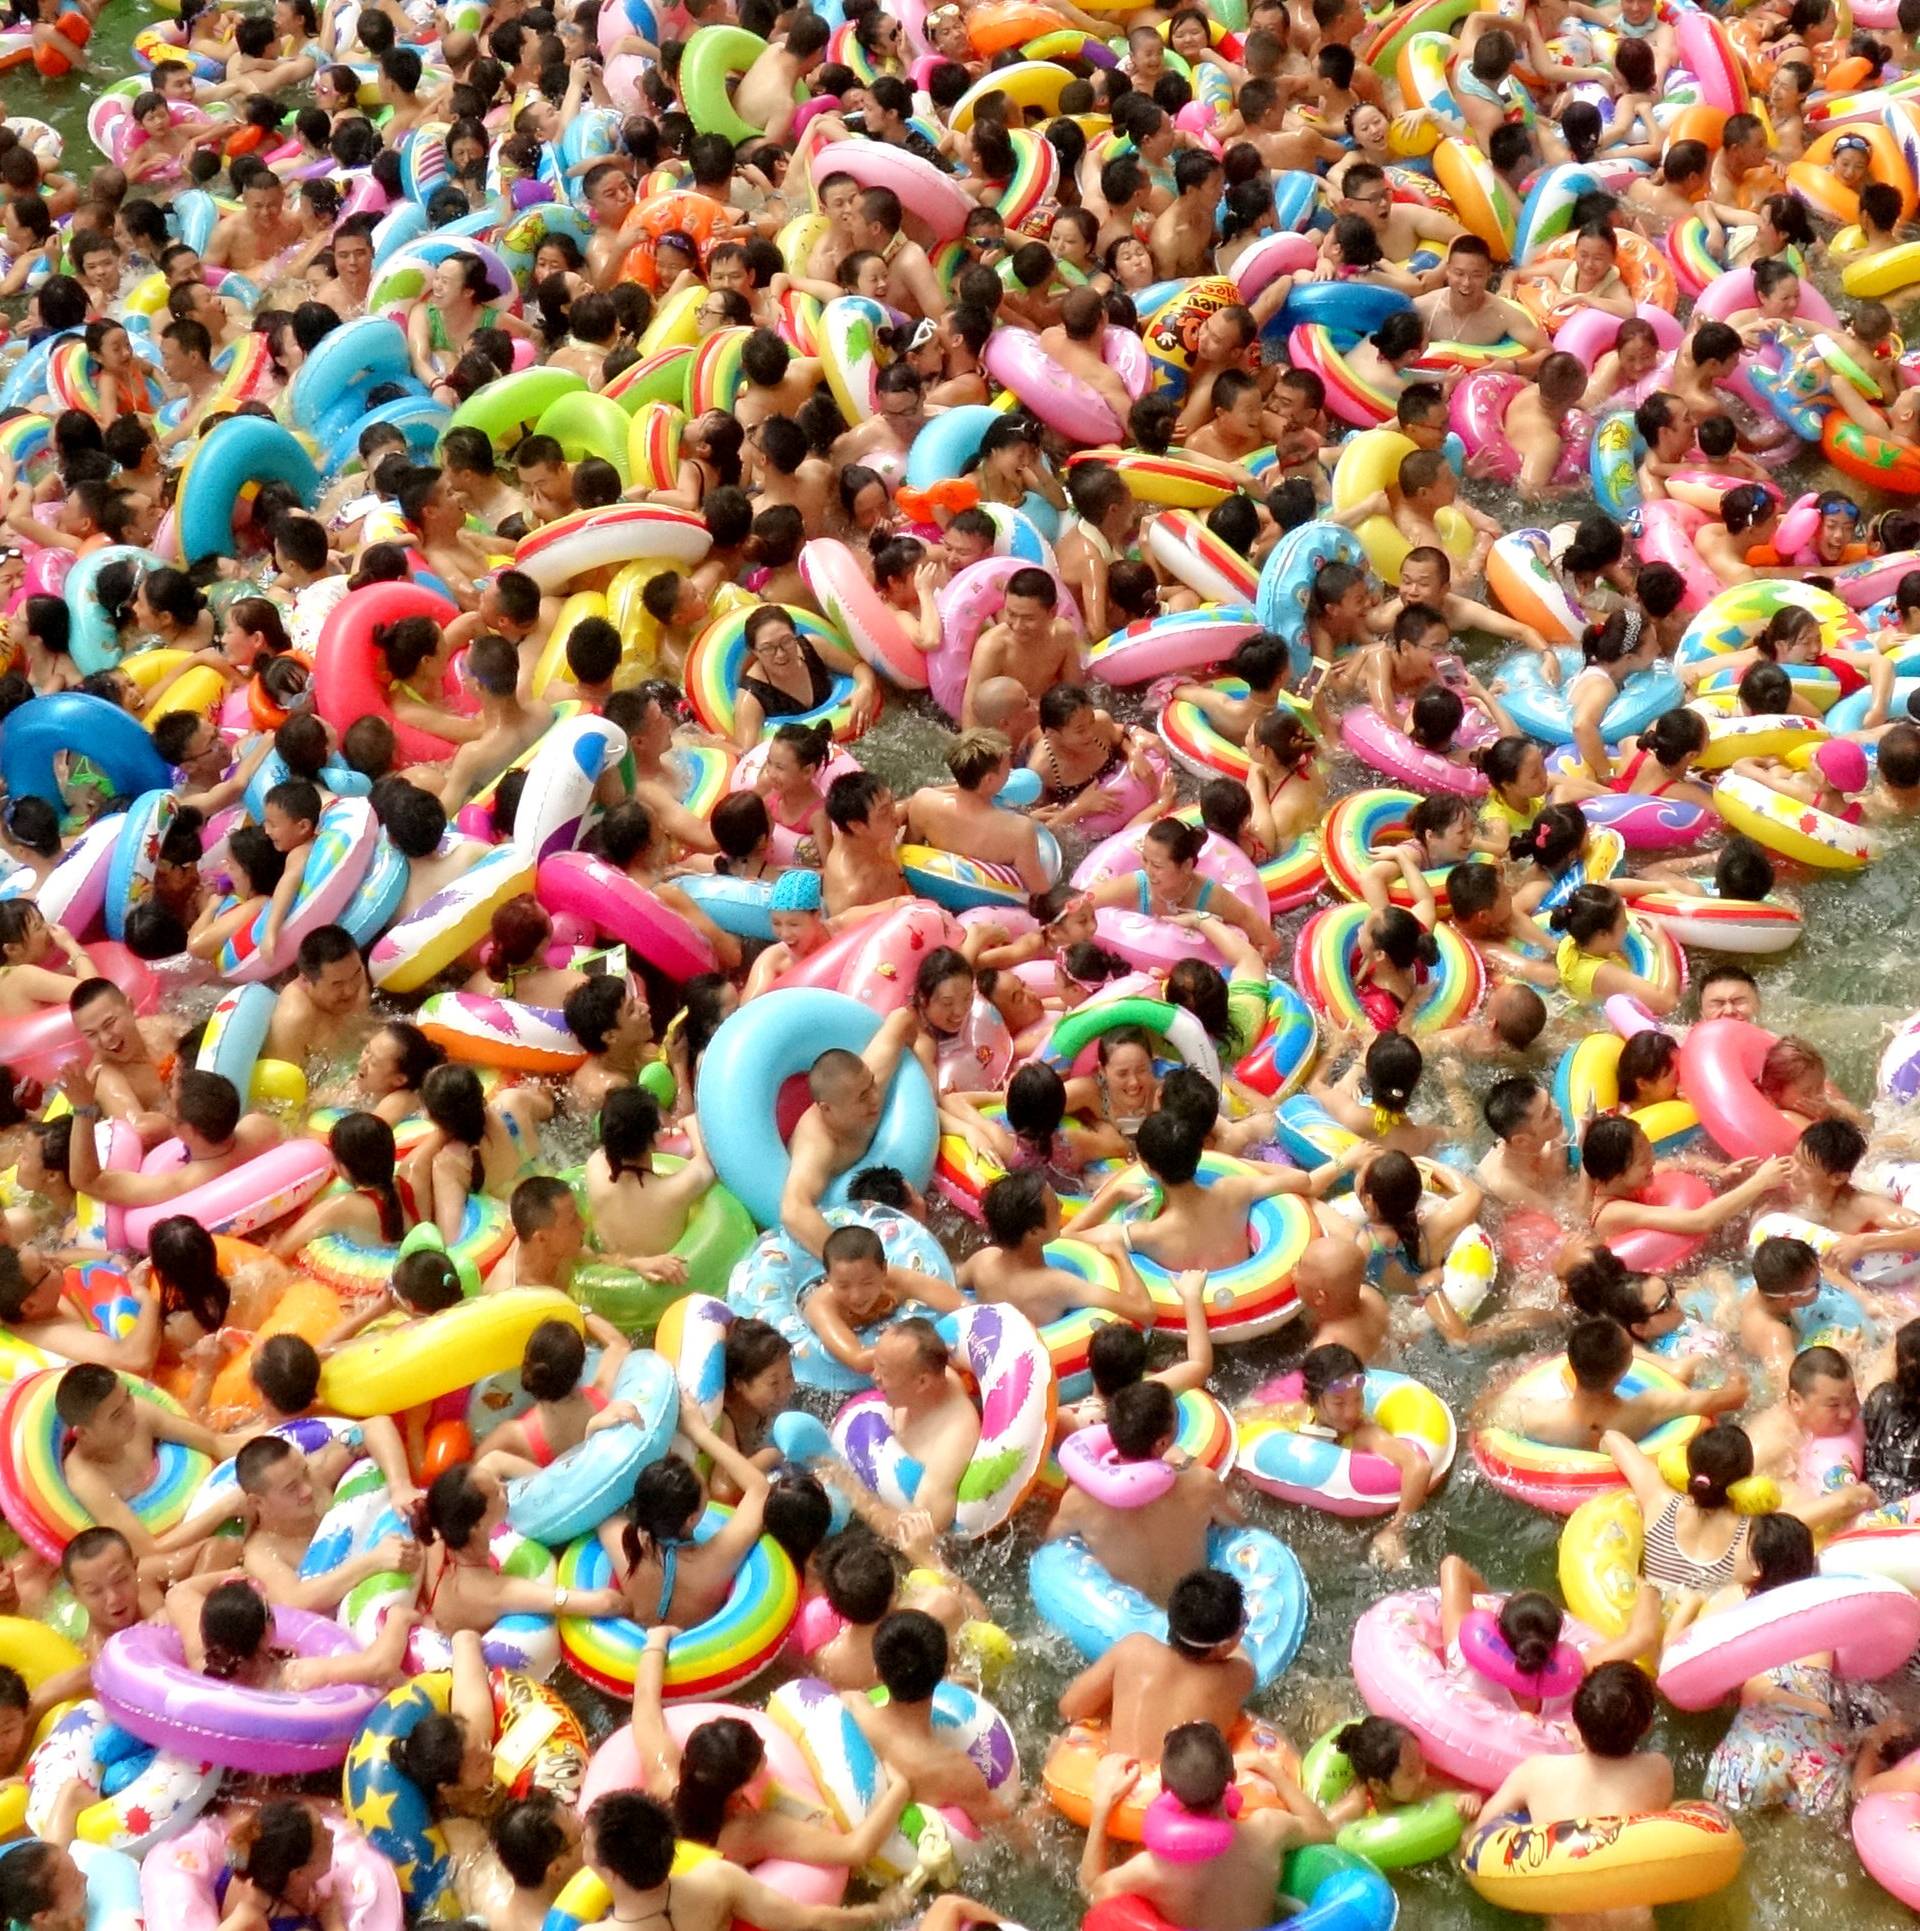 People cool off at a swimming pool in Daying county